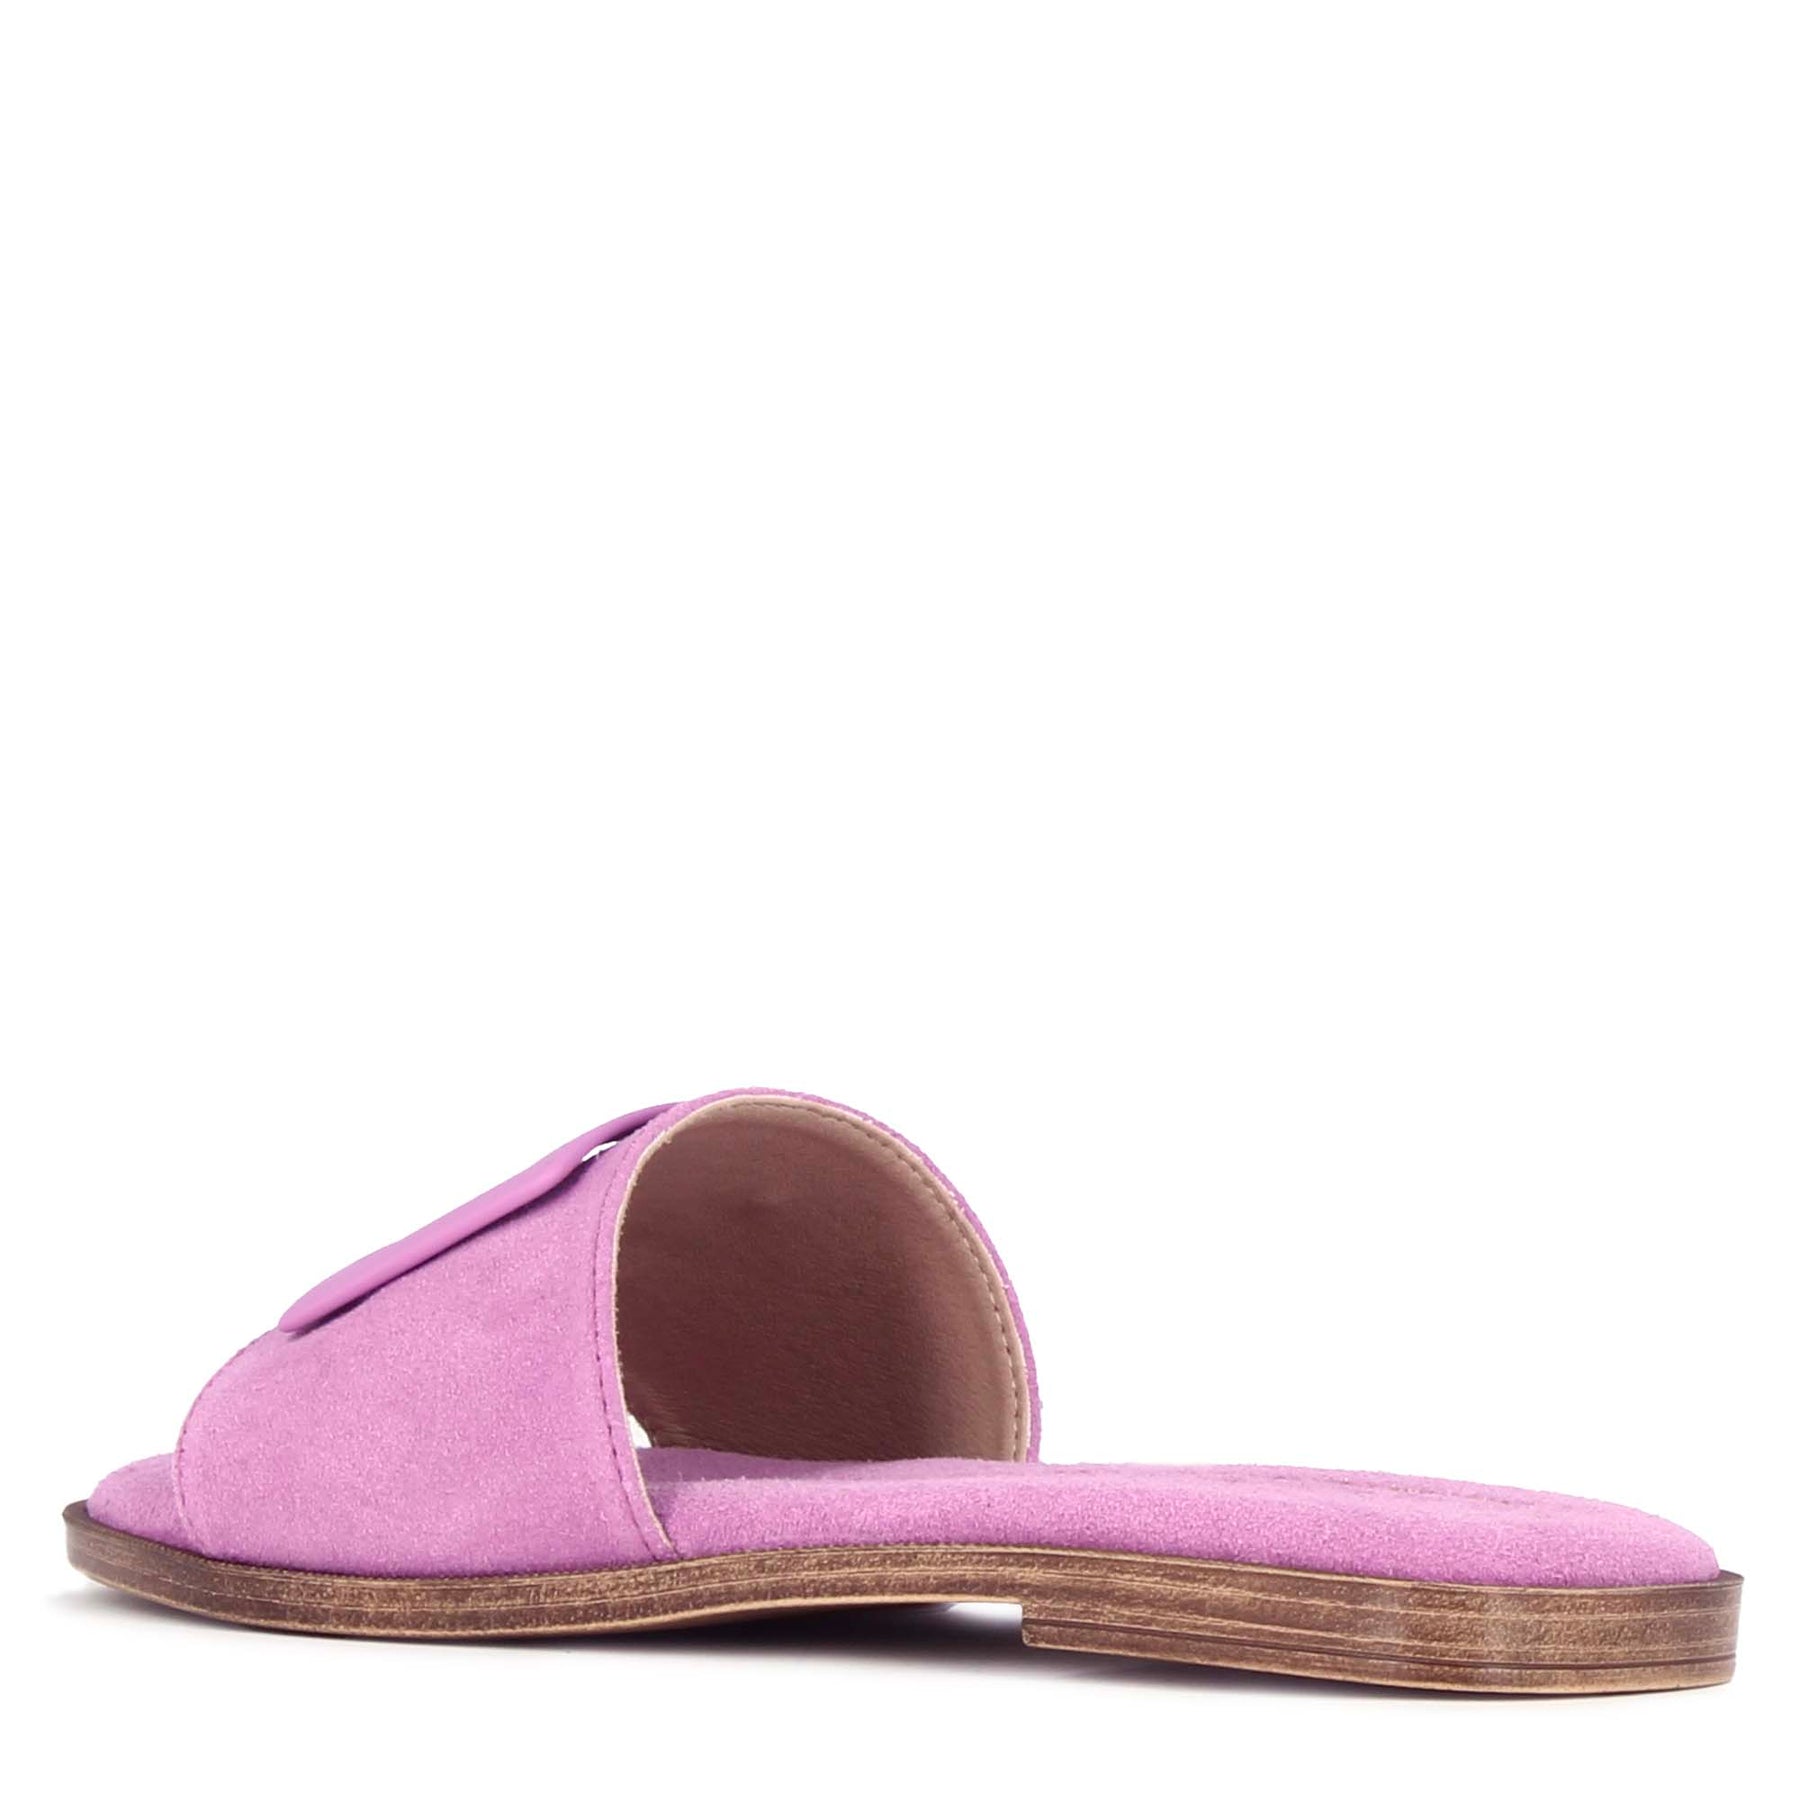 Women's suede slippers with purple band